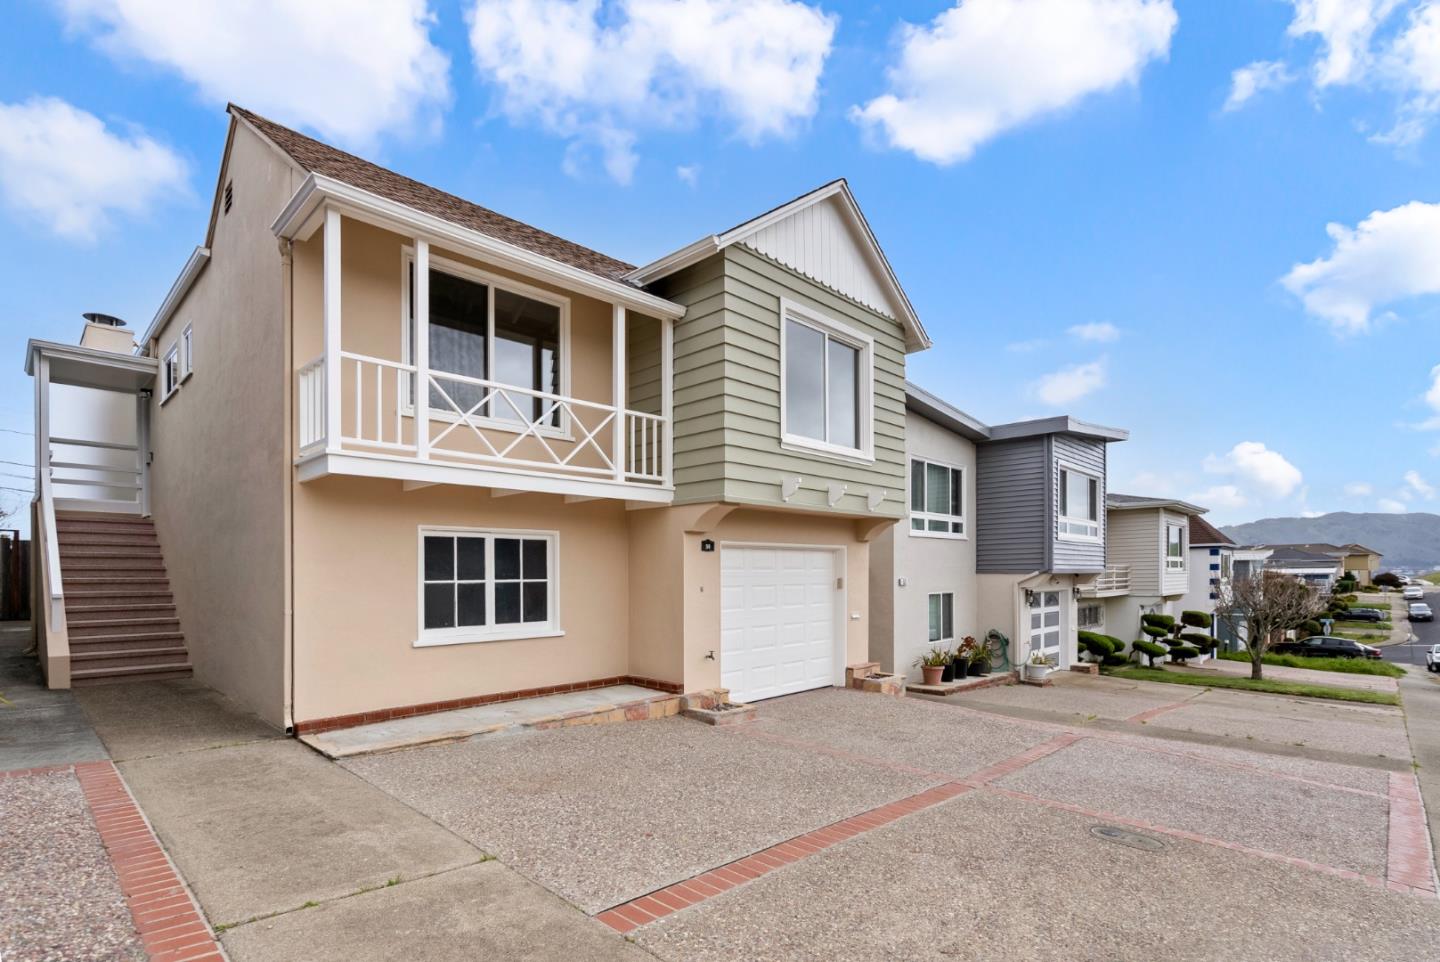 Photo of 56 Ocean Grove Ave in Daly City, CA